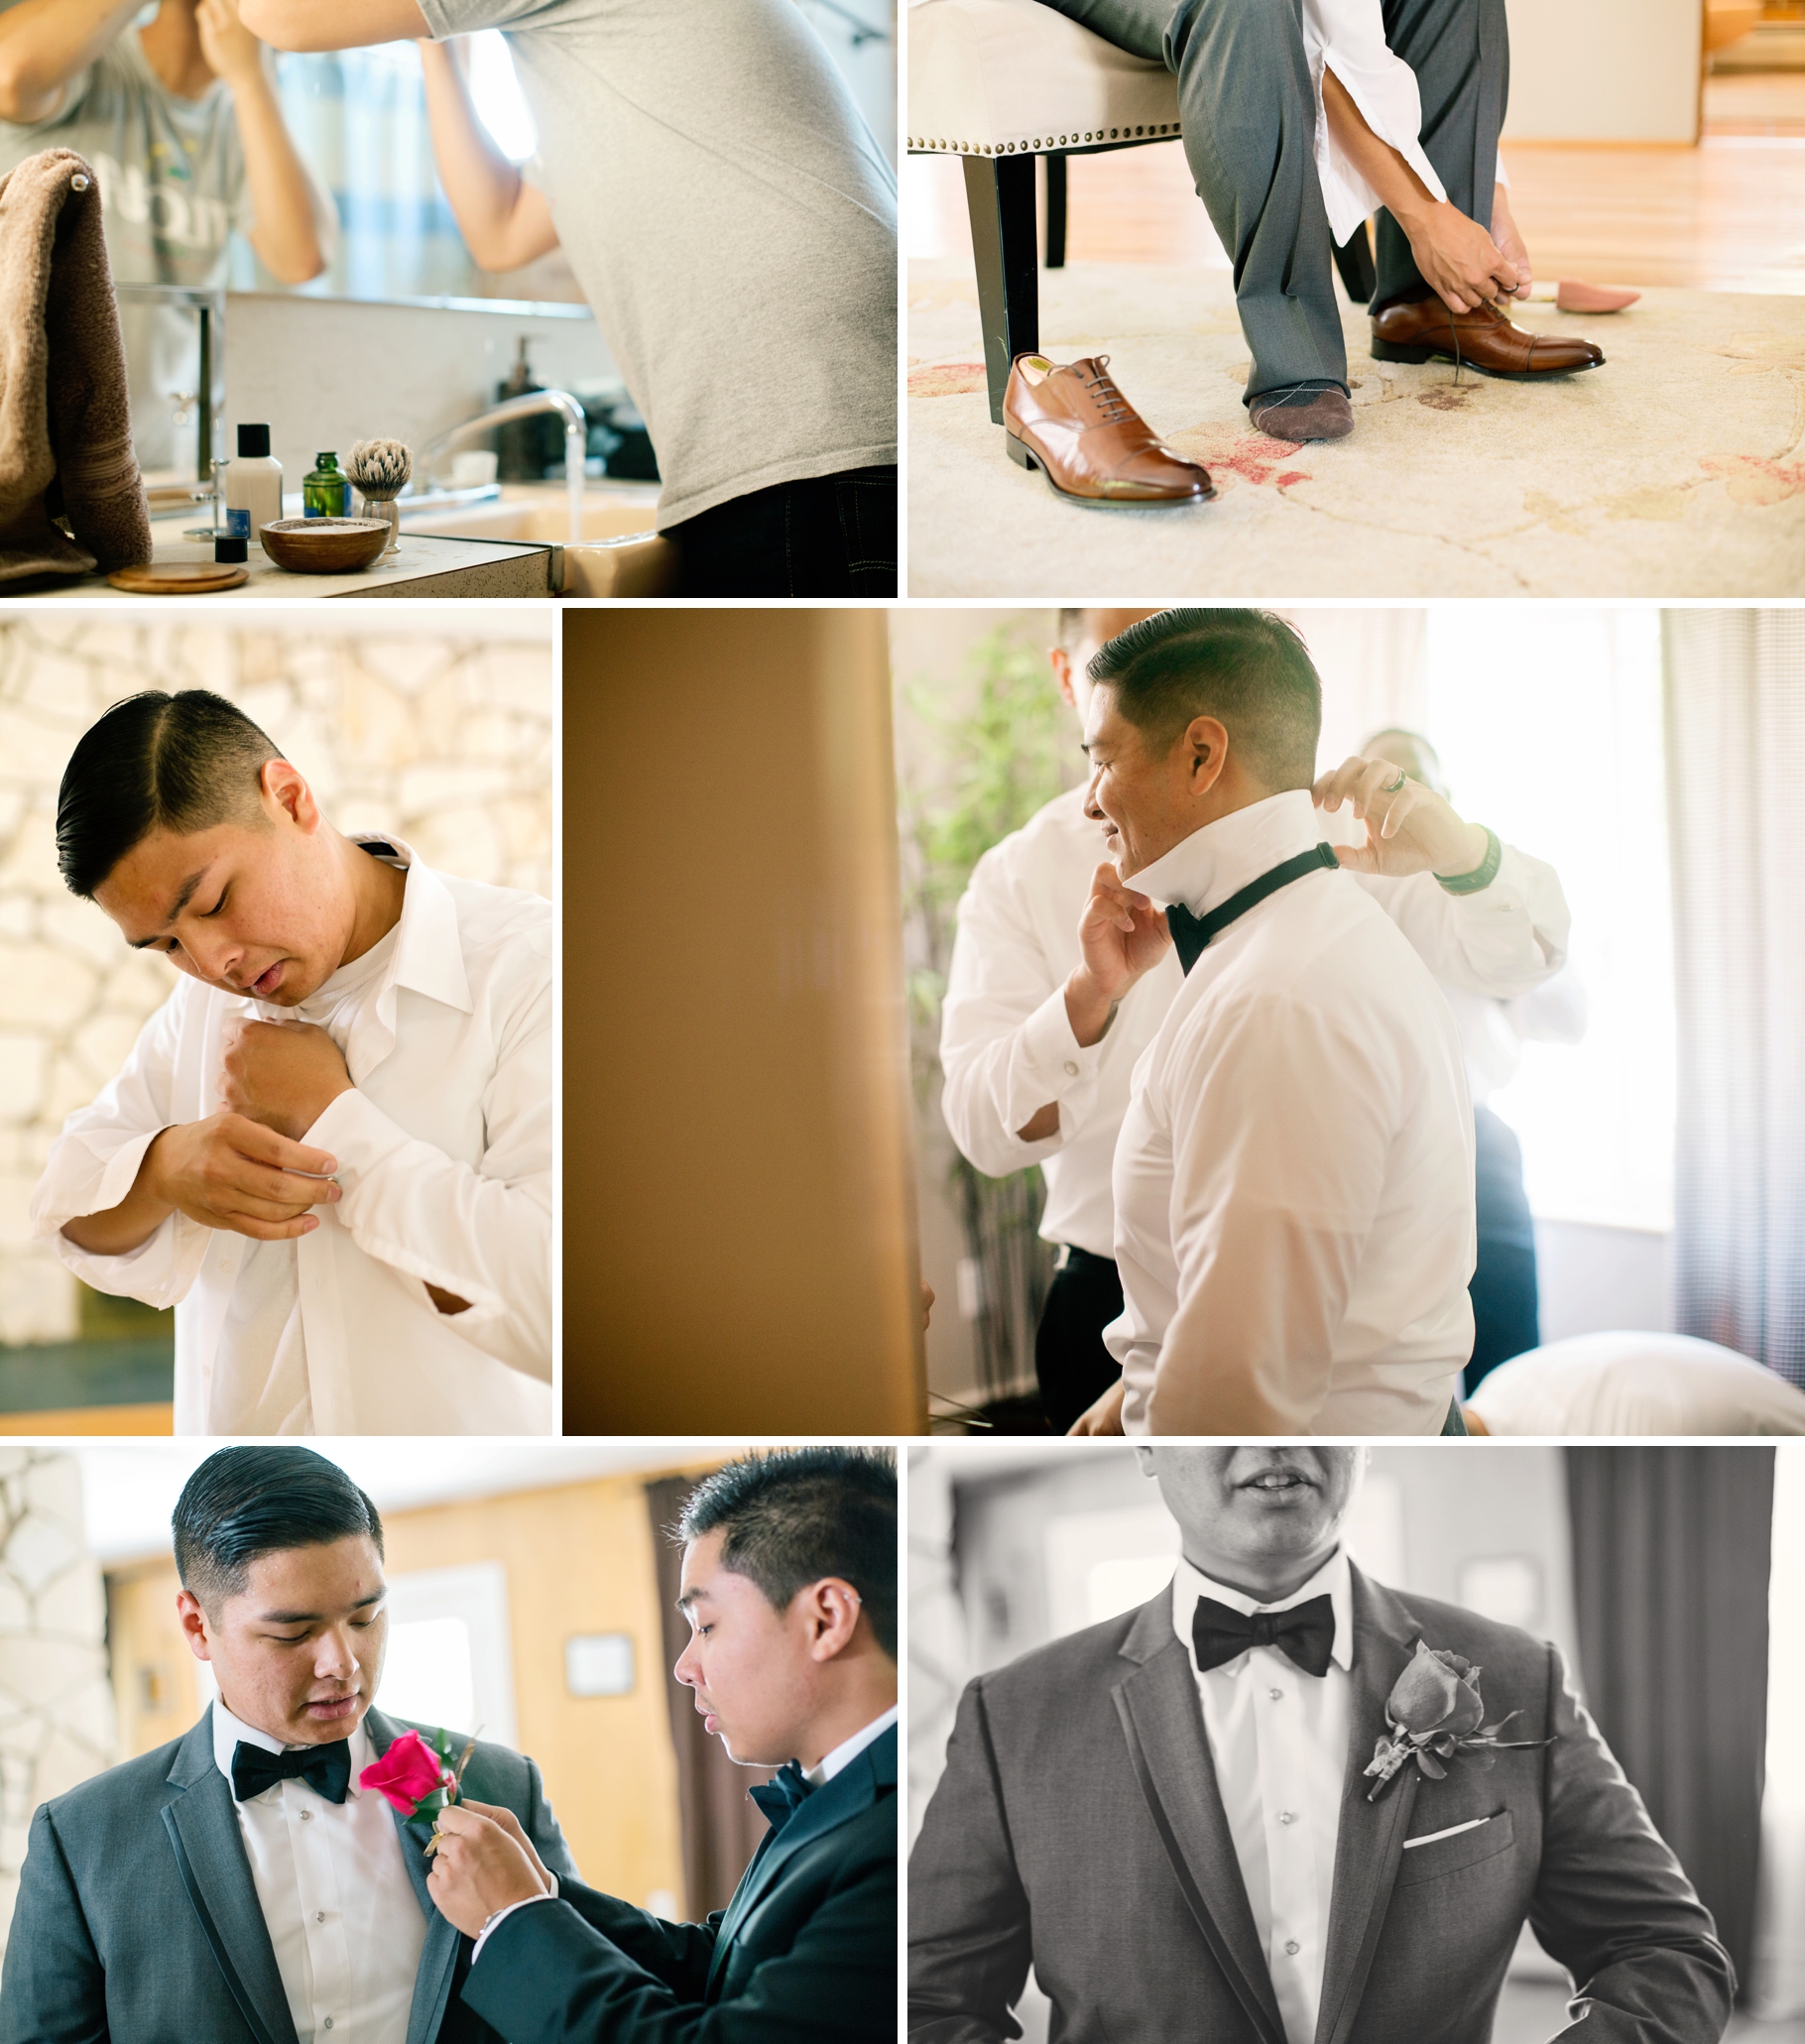 6-Getting-Ready-Grooms-Suit-Gray-Details-Classic-Bow-Tie-Rock-Creek-Gardens-Seattle-Wedding-Photography-by-Betty-Elaine